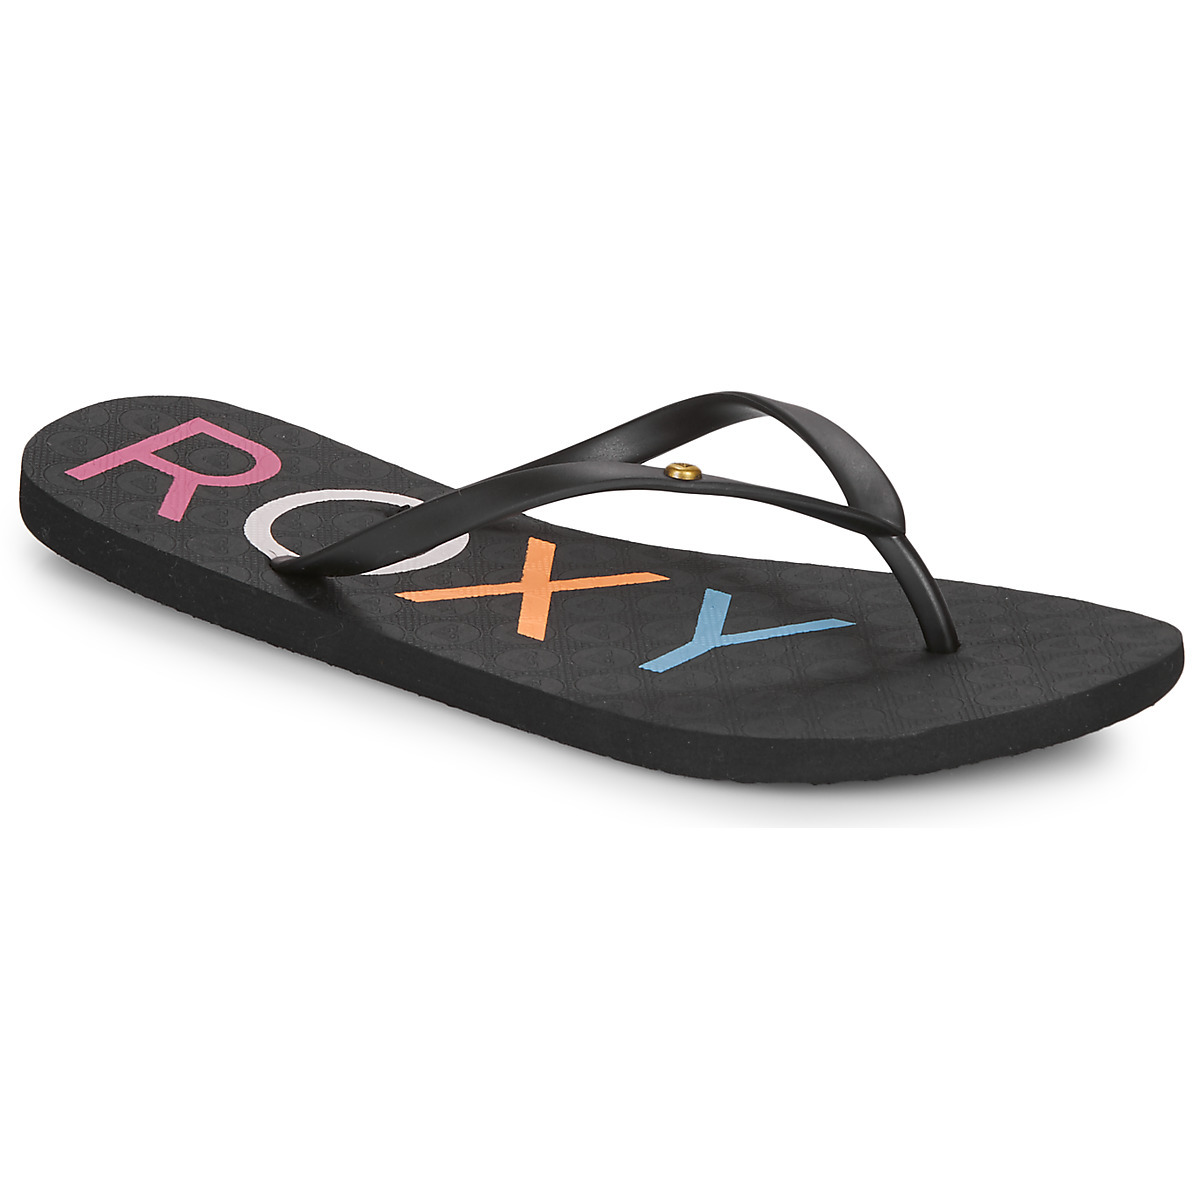 Roxy - Black Flip Flops for Woman from Spartoo GOOFASH